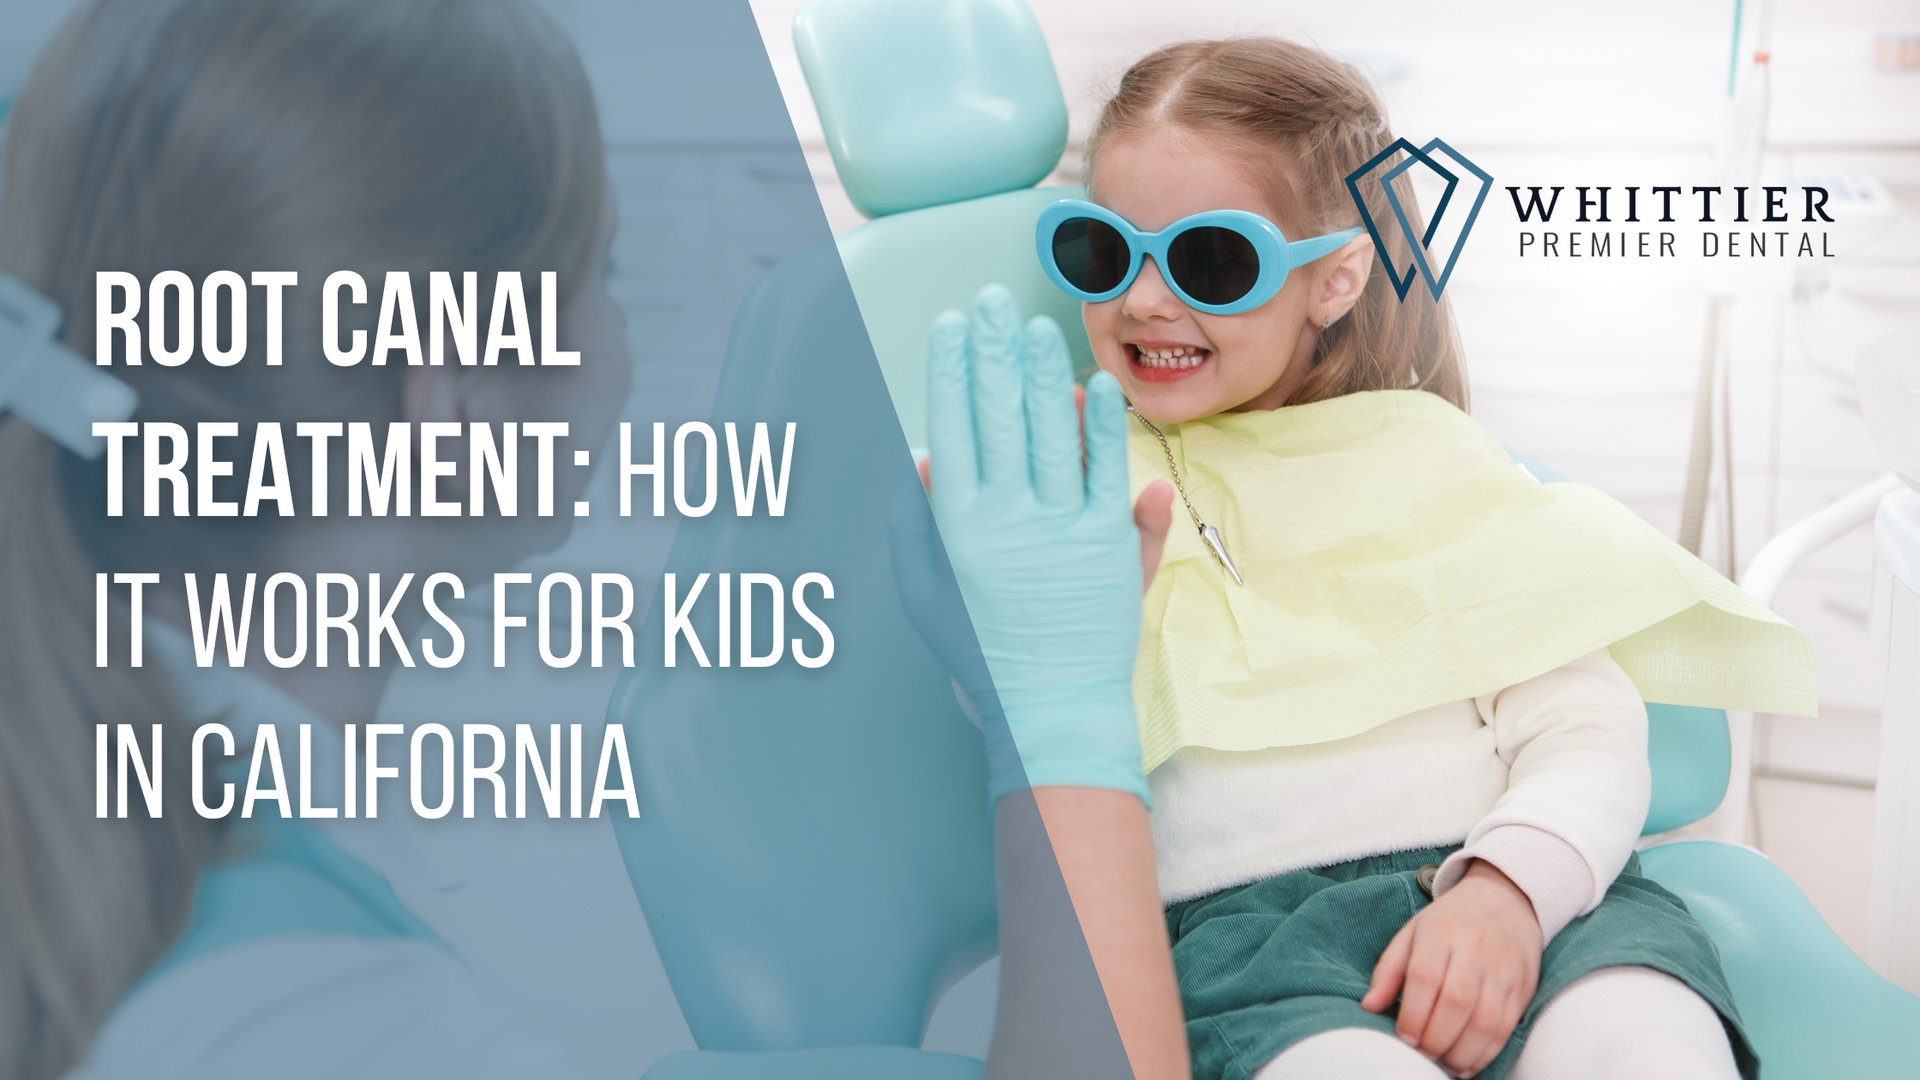 a little girl wearing sunglasses is sitting in a dental chair .